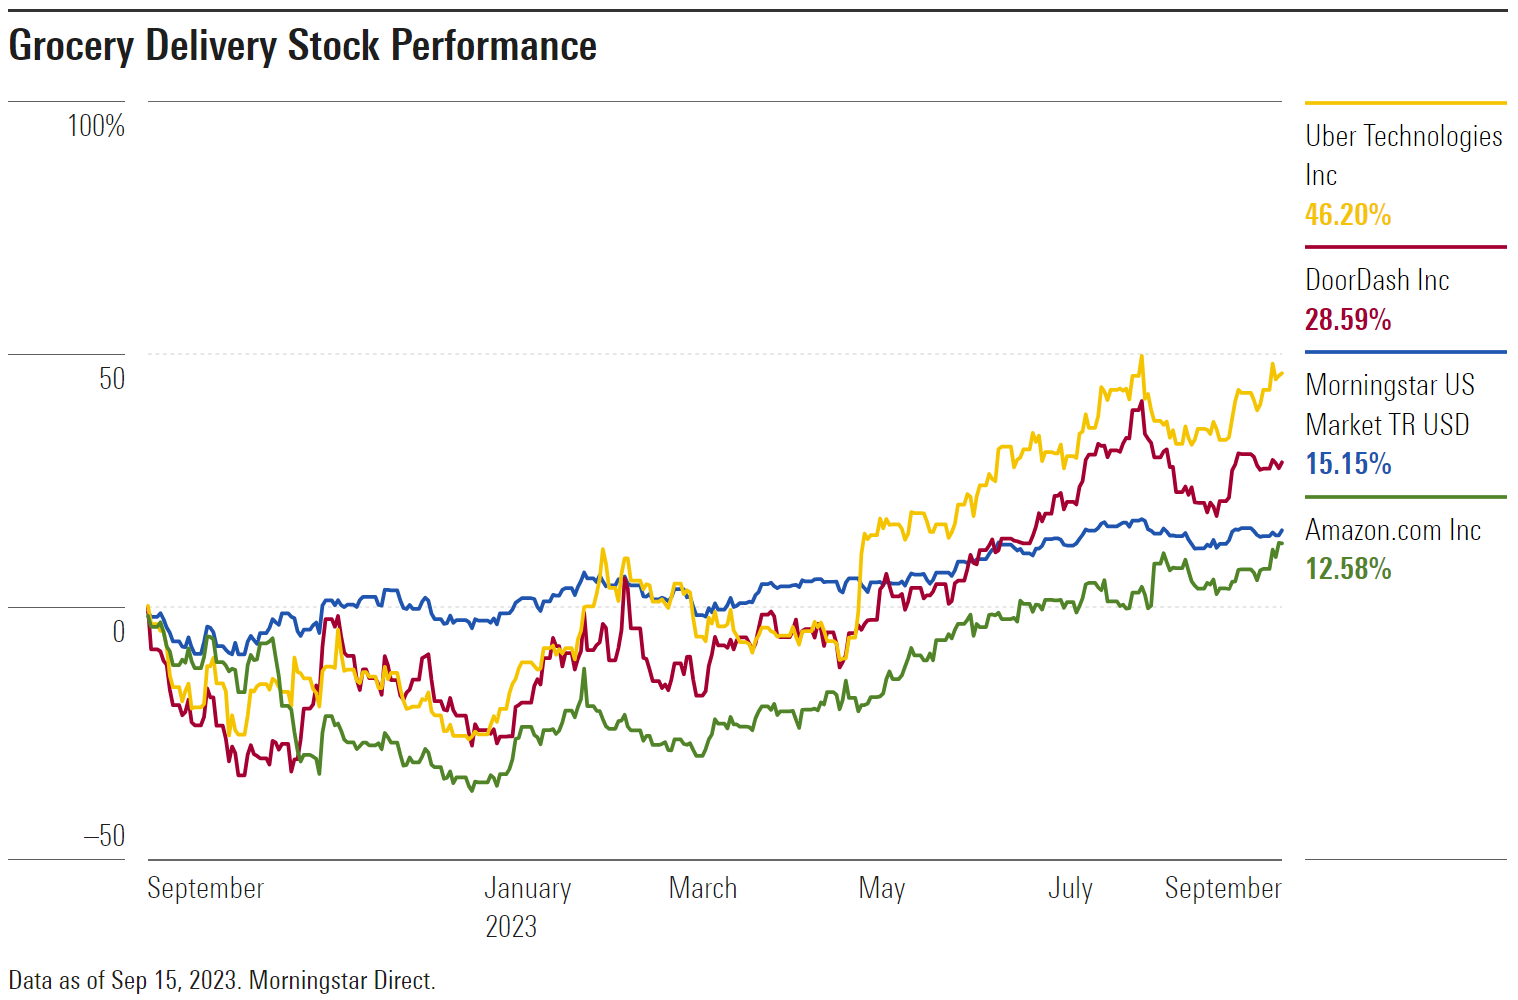 Grocery delivery stock performance